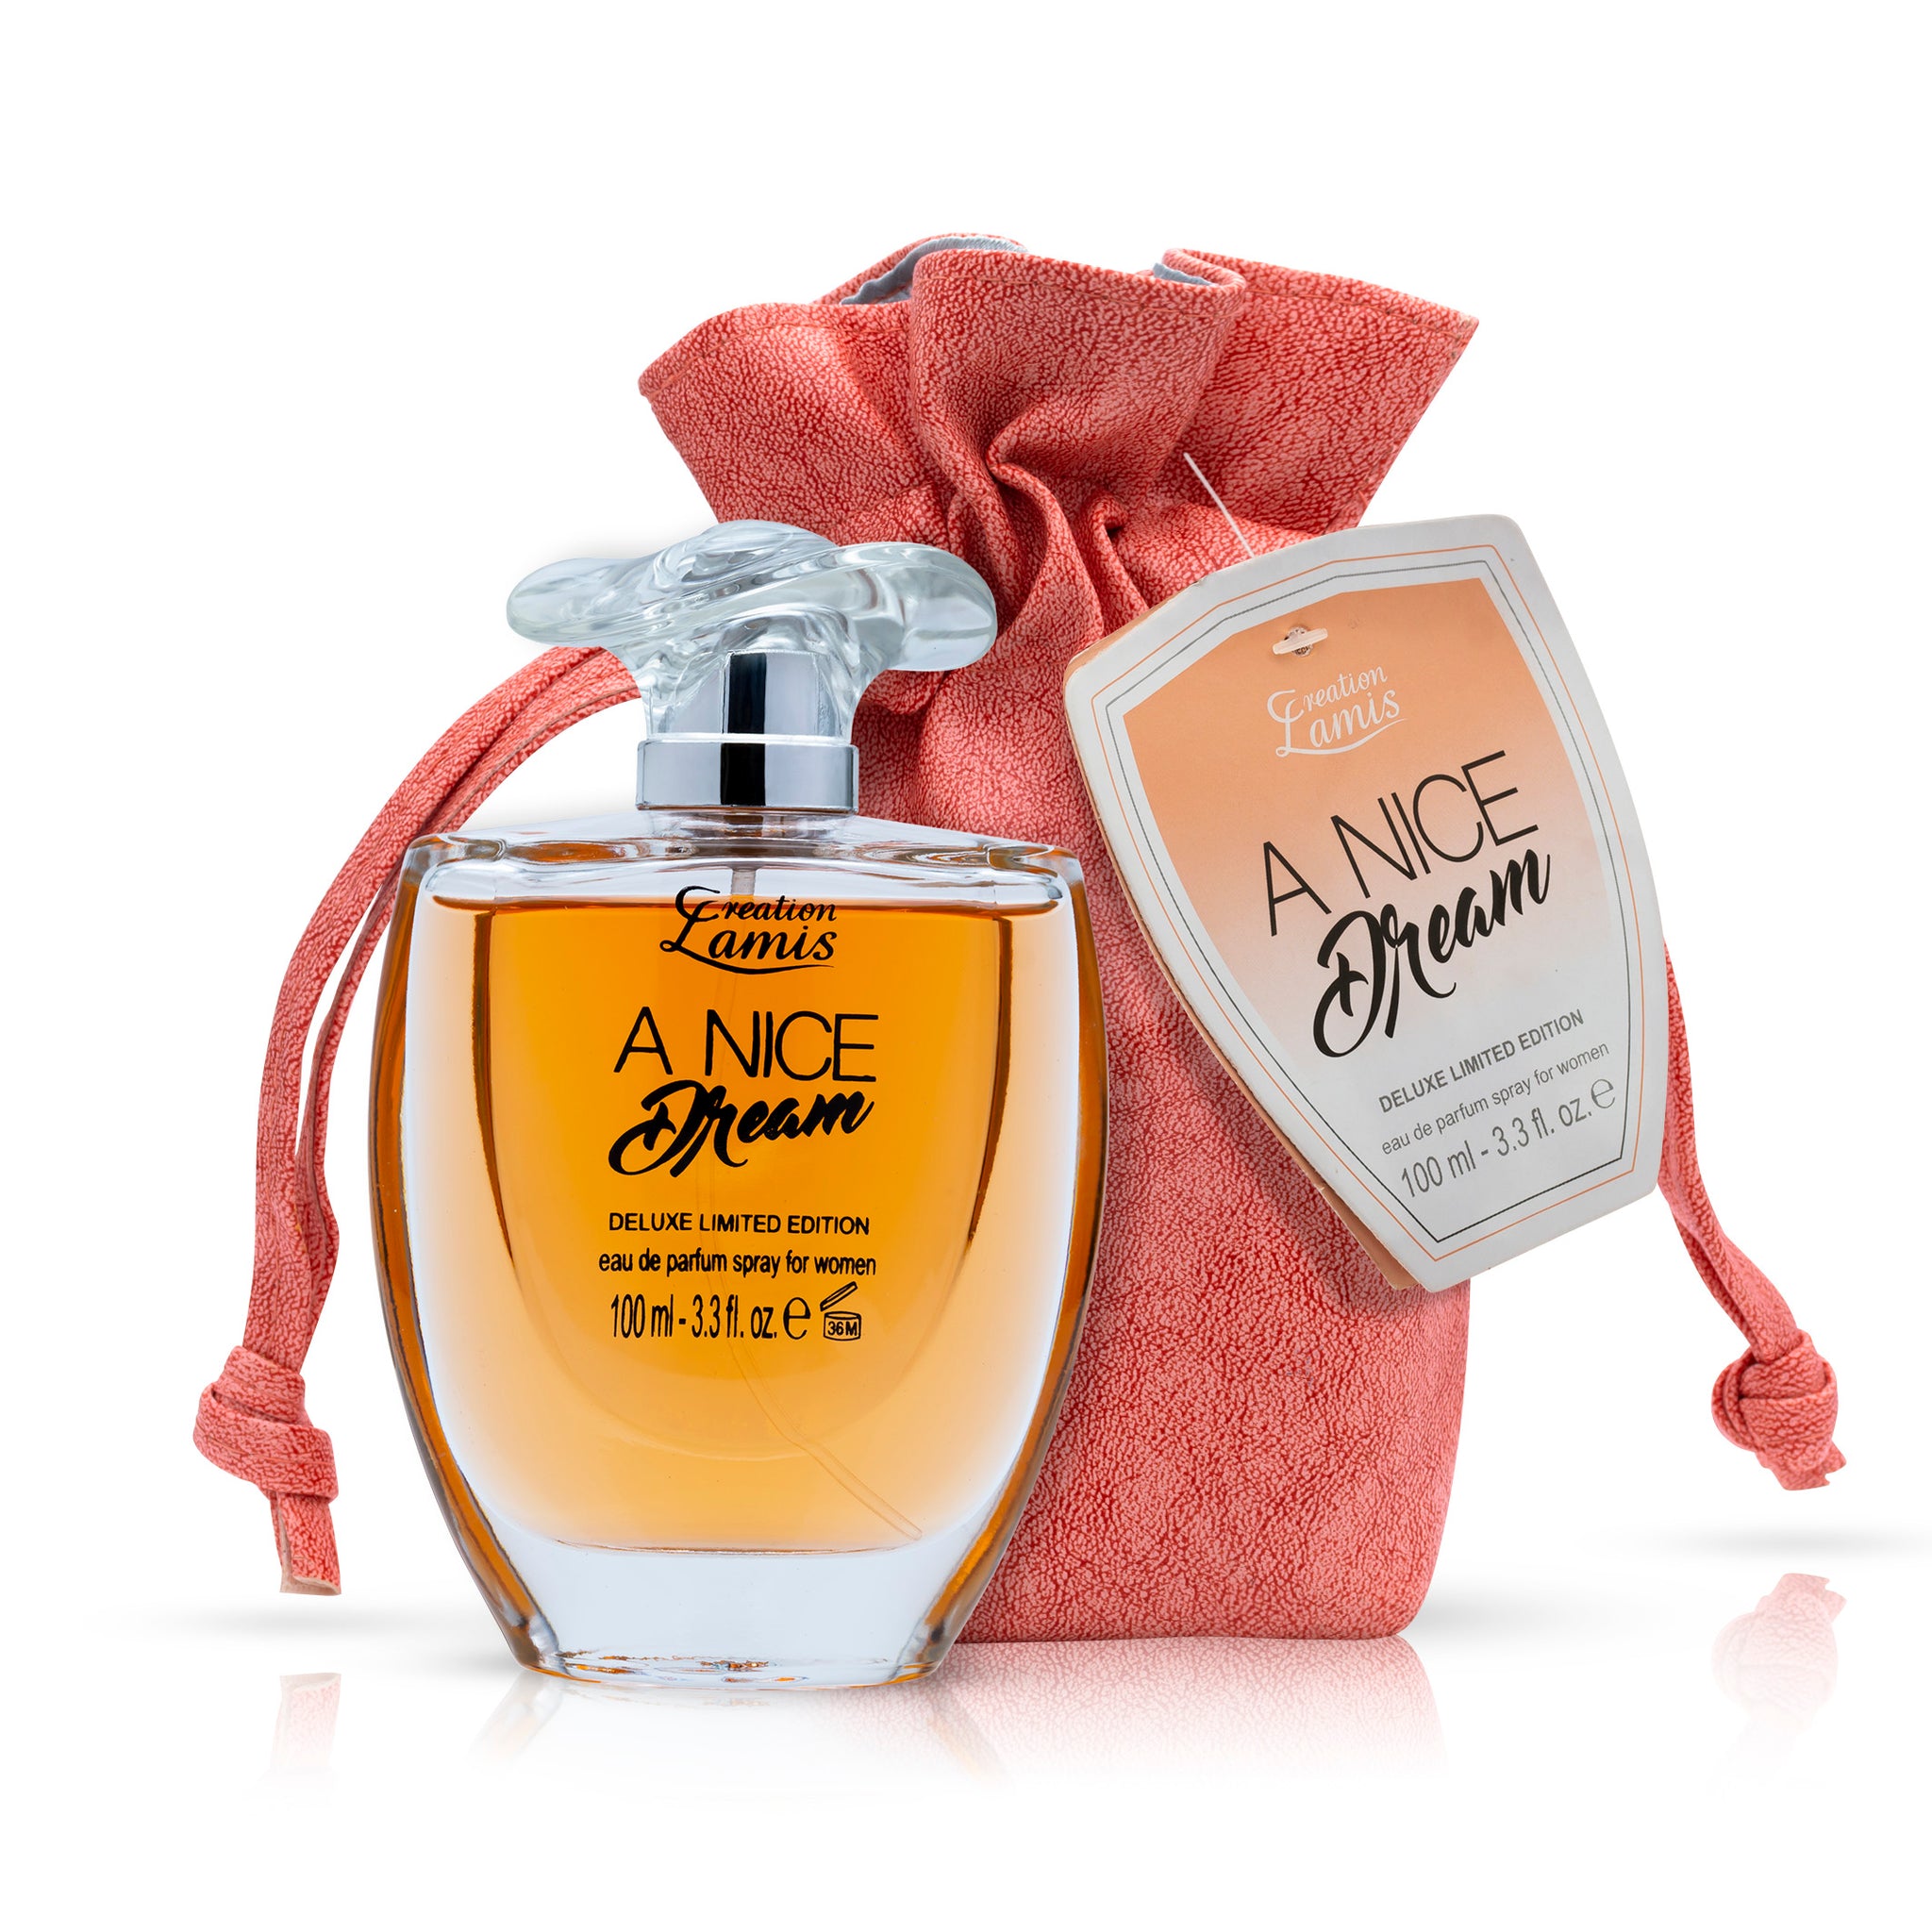 A Nice Dream - Deluxe Edition for Women